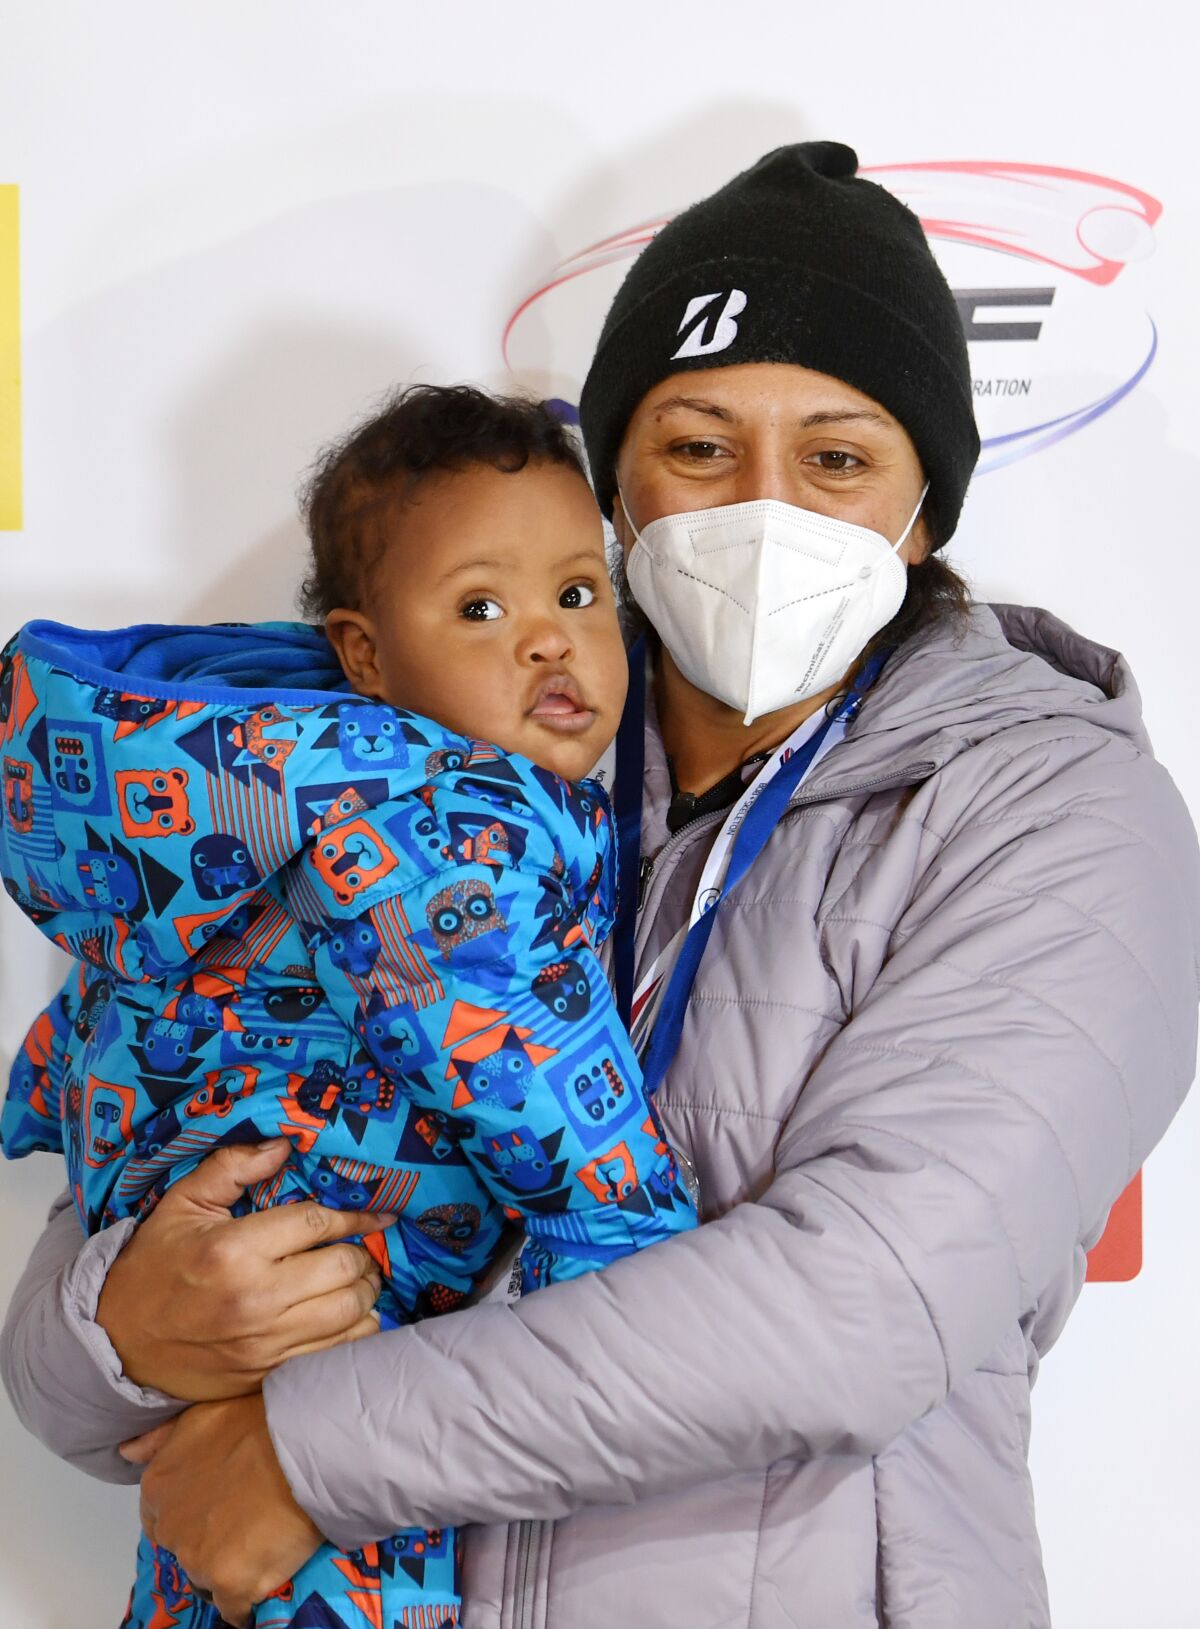 U.S. bobsled pilot Elana Meyers Taylor holds her son, Nico, during an award ceremony Jan. 23, 2021.